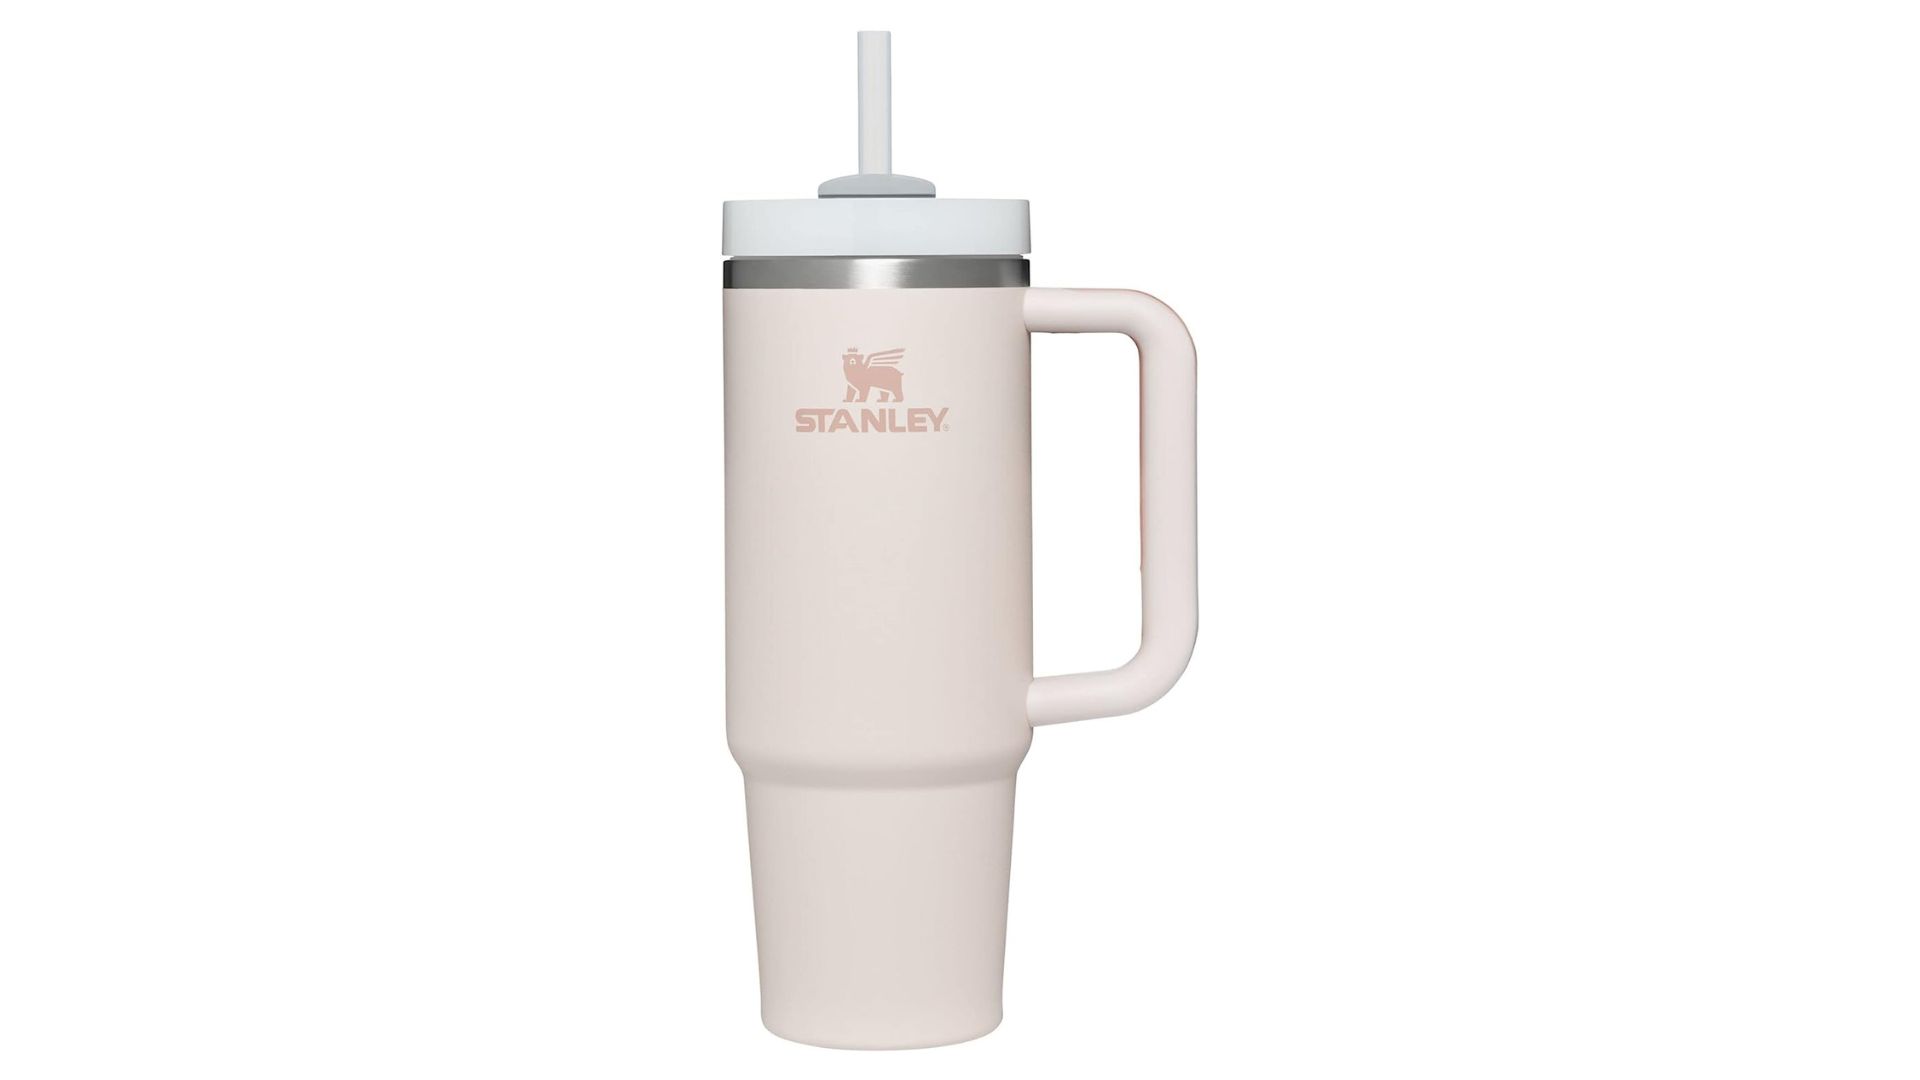 https://onecms-res.cloudinary.com/image/upload/v1690280288/mediacorp/8days/image/2023/07/25/01_stanley_quencher_h2.0_flowstate_stainless_steel_vacuum_insulated_tumbler.jpg